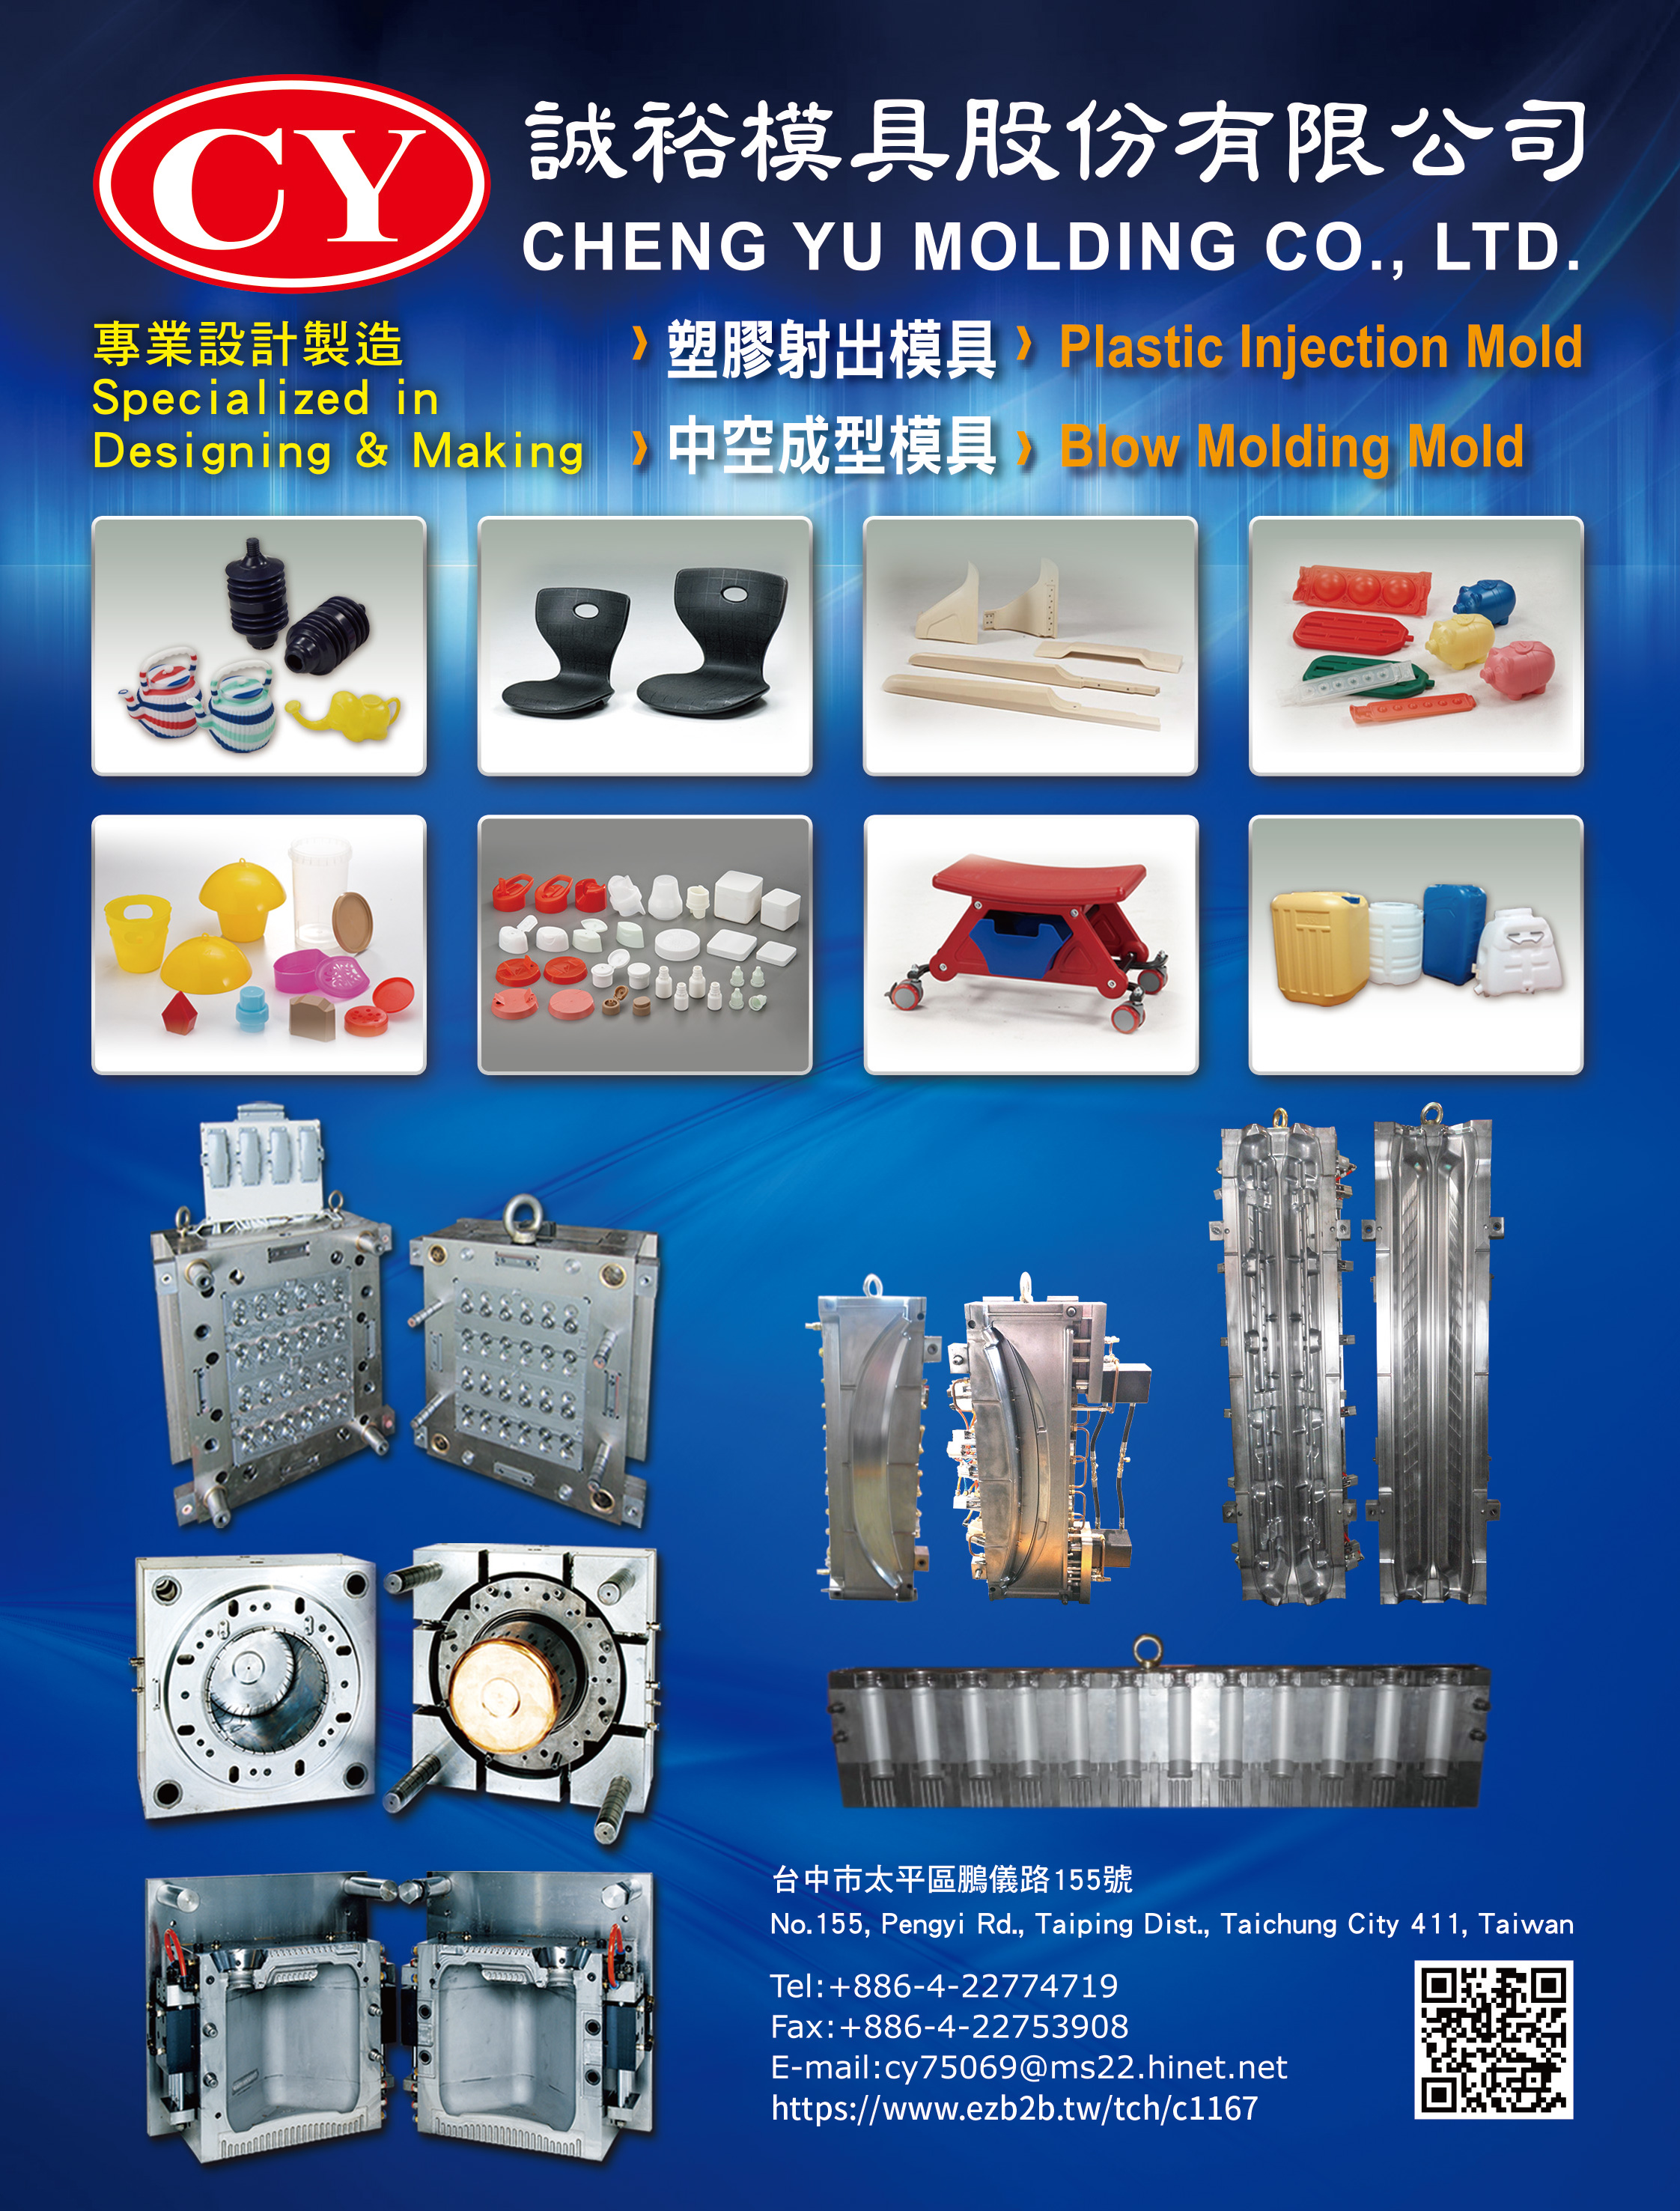 2023 Mold & Molding Products